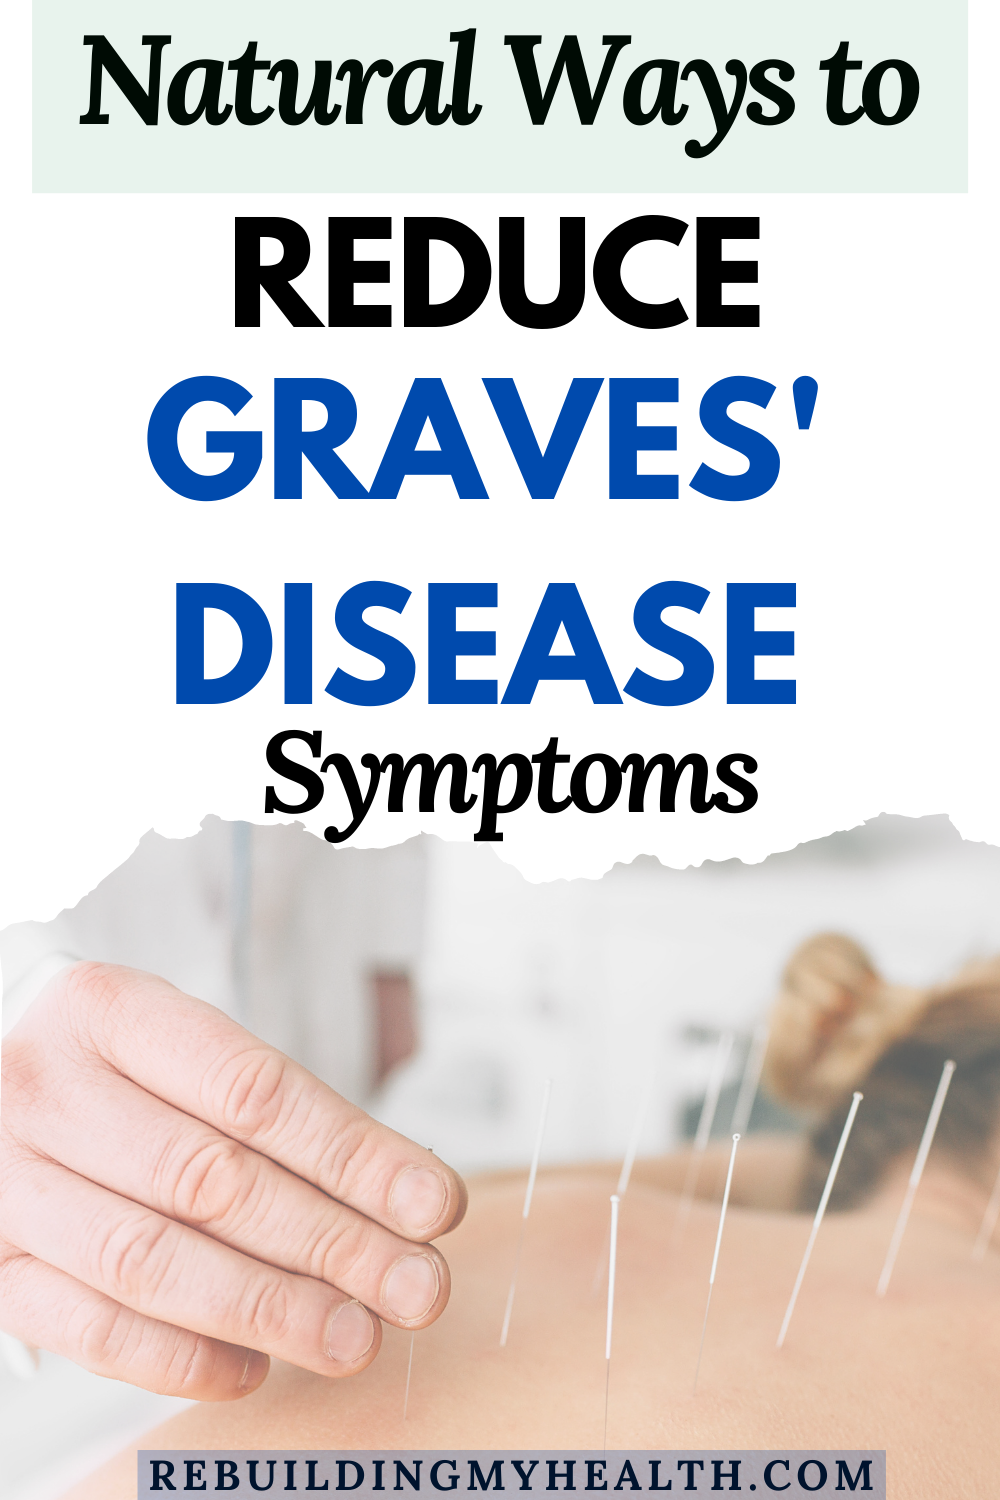 Along with medication and surgery, Kathi turned to acupuncture, massage and an anti-inflammatory diet to prevent flares of Graves' disease. Learn about reducing Graves' disease symptoms.